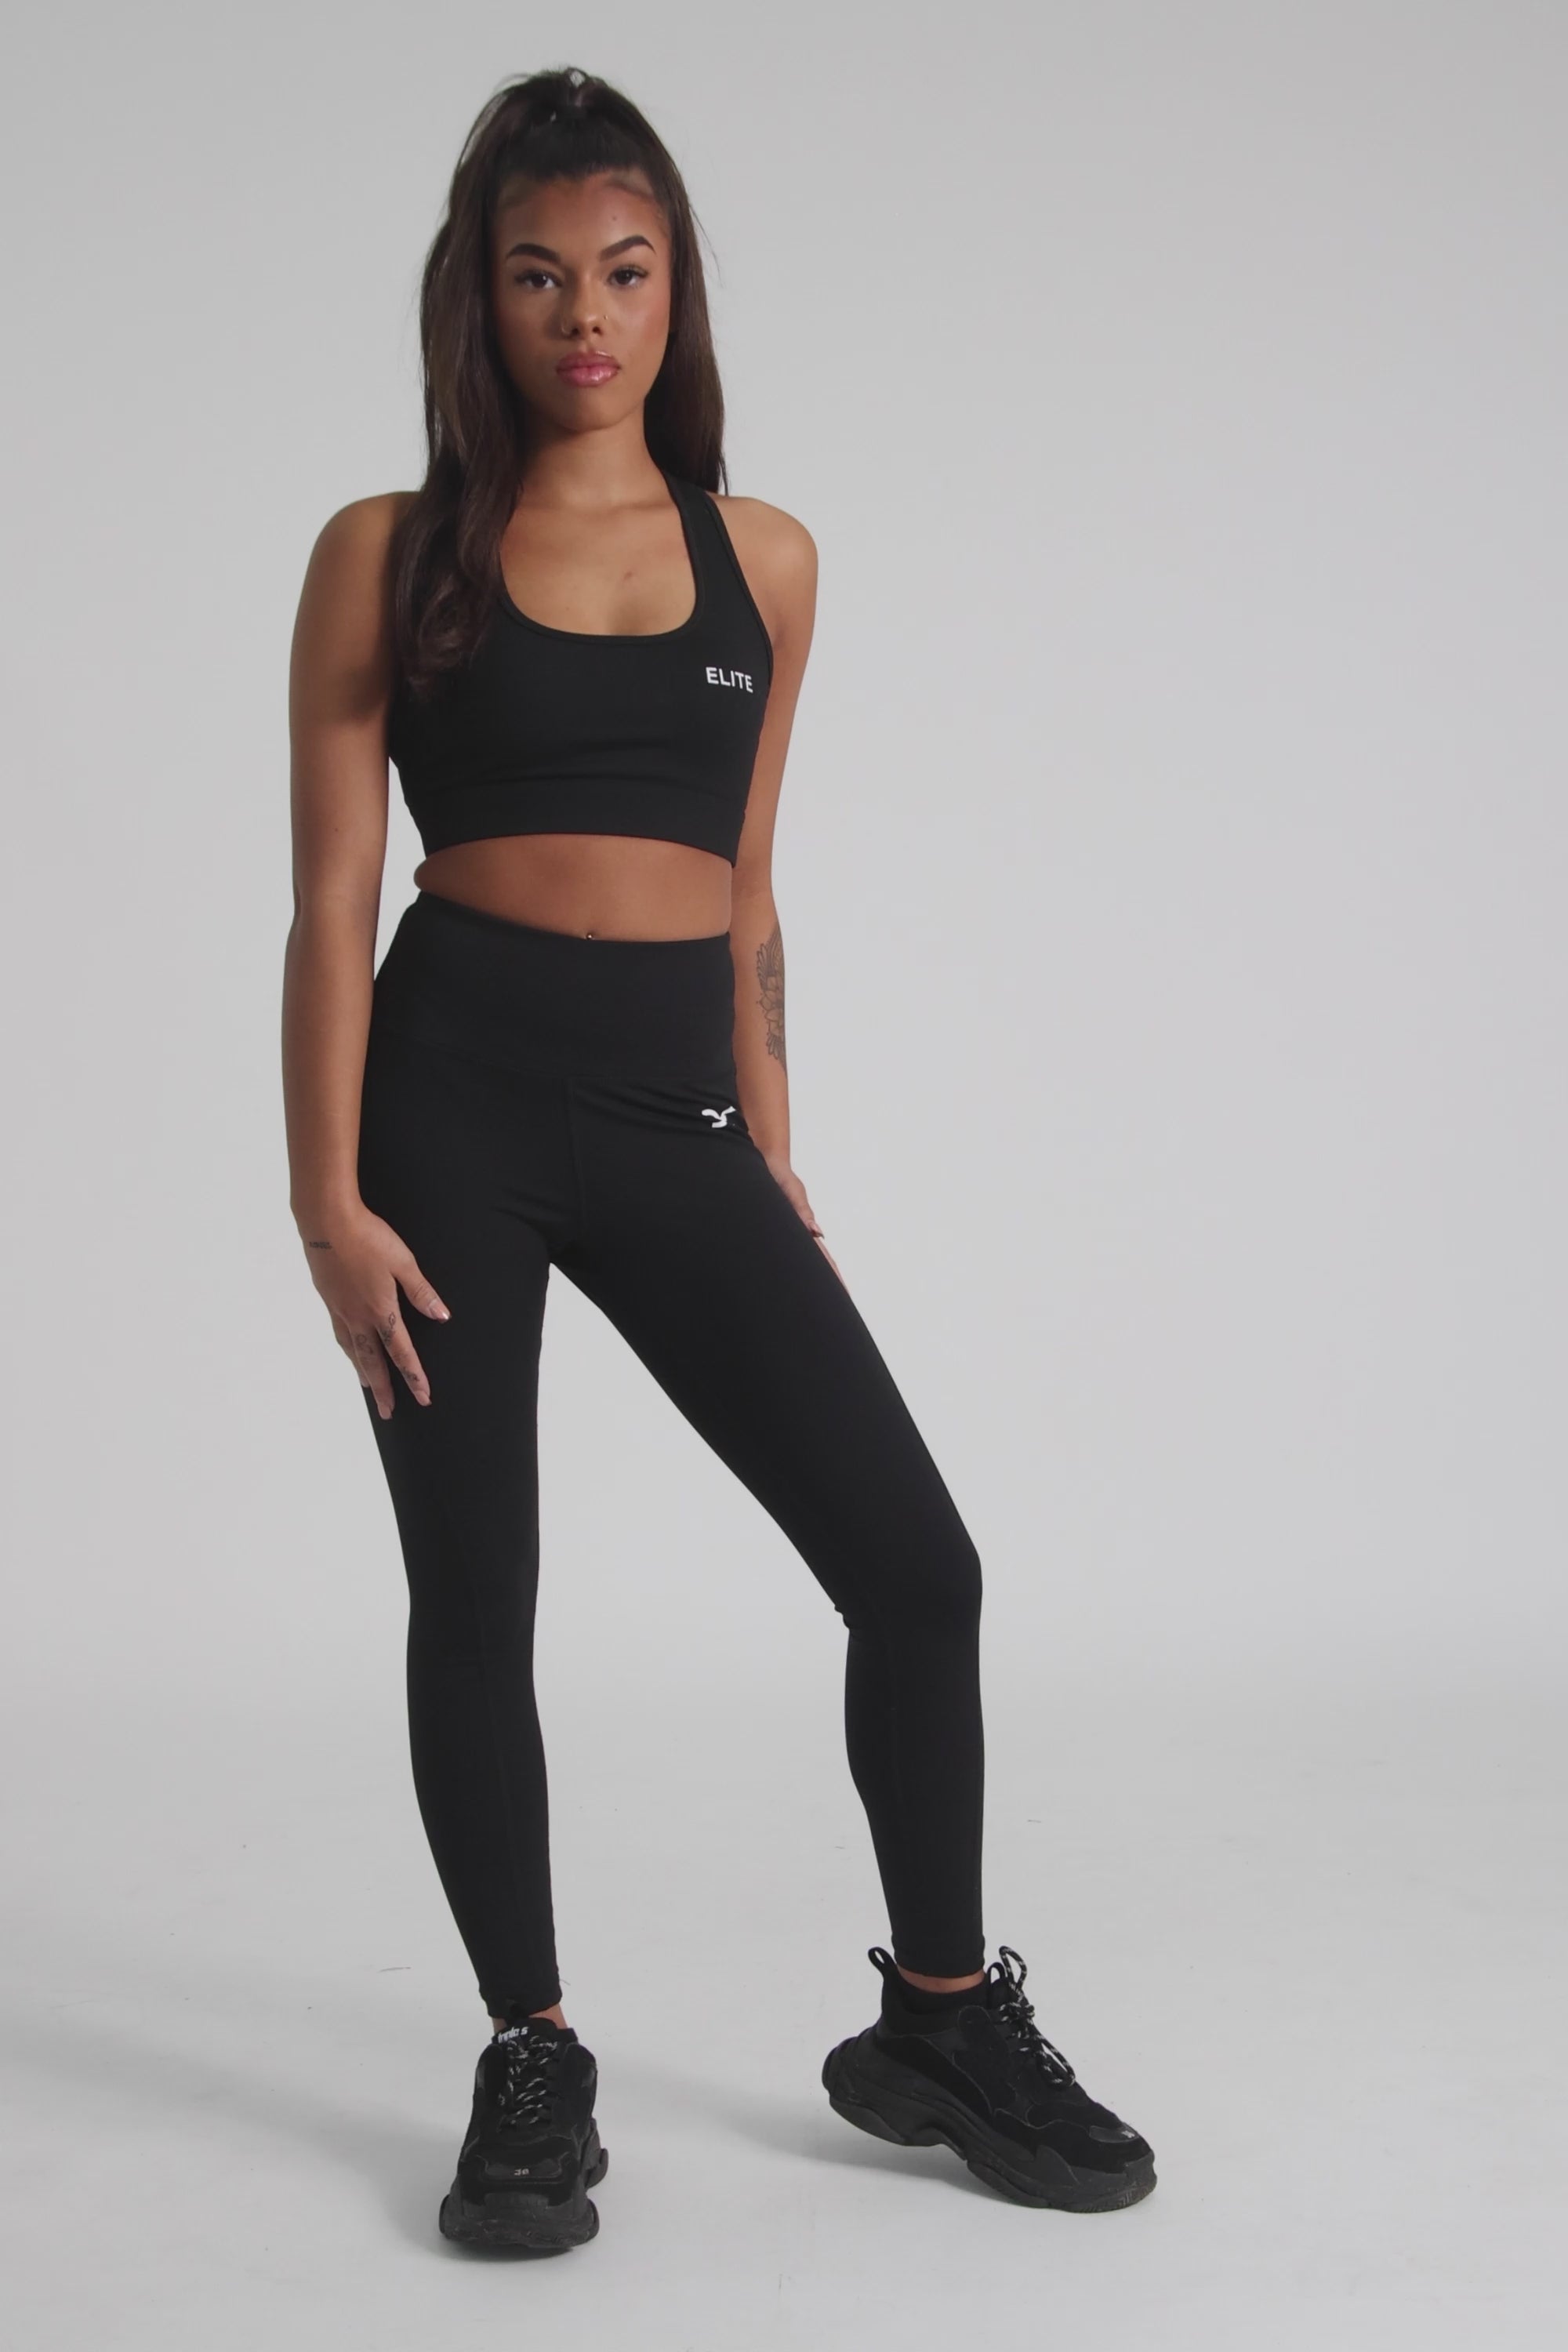 Envolve Midnight black cropped sports bra with racer back and scoop neck.